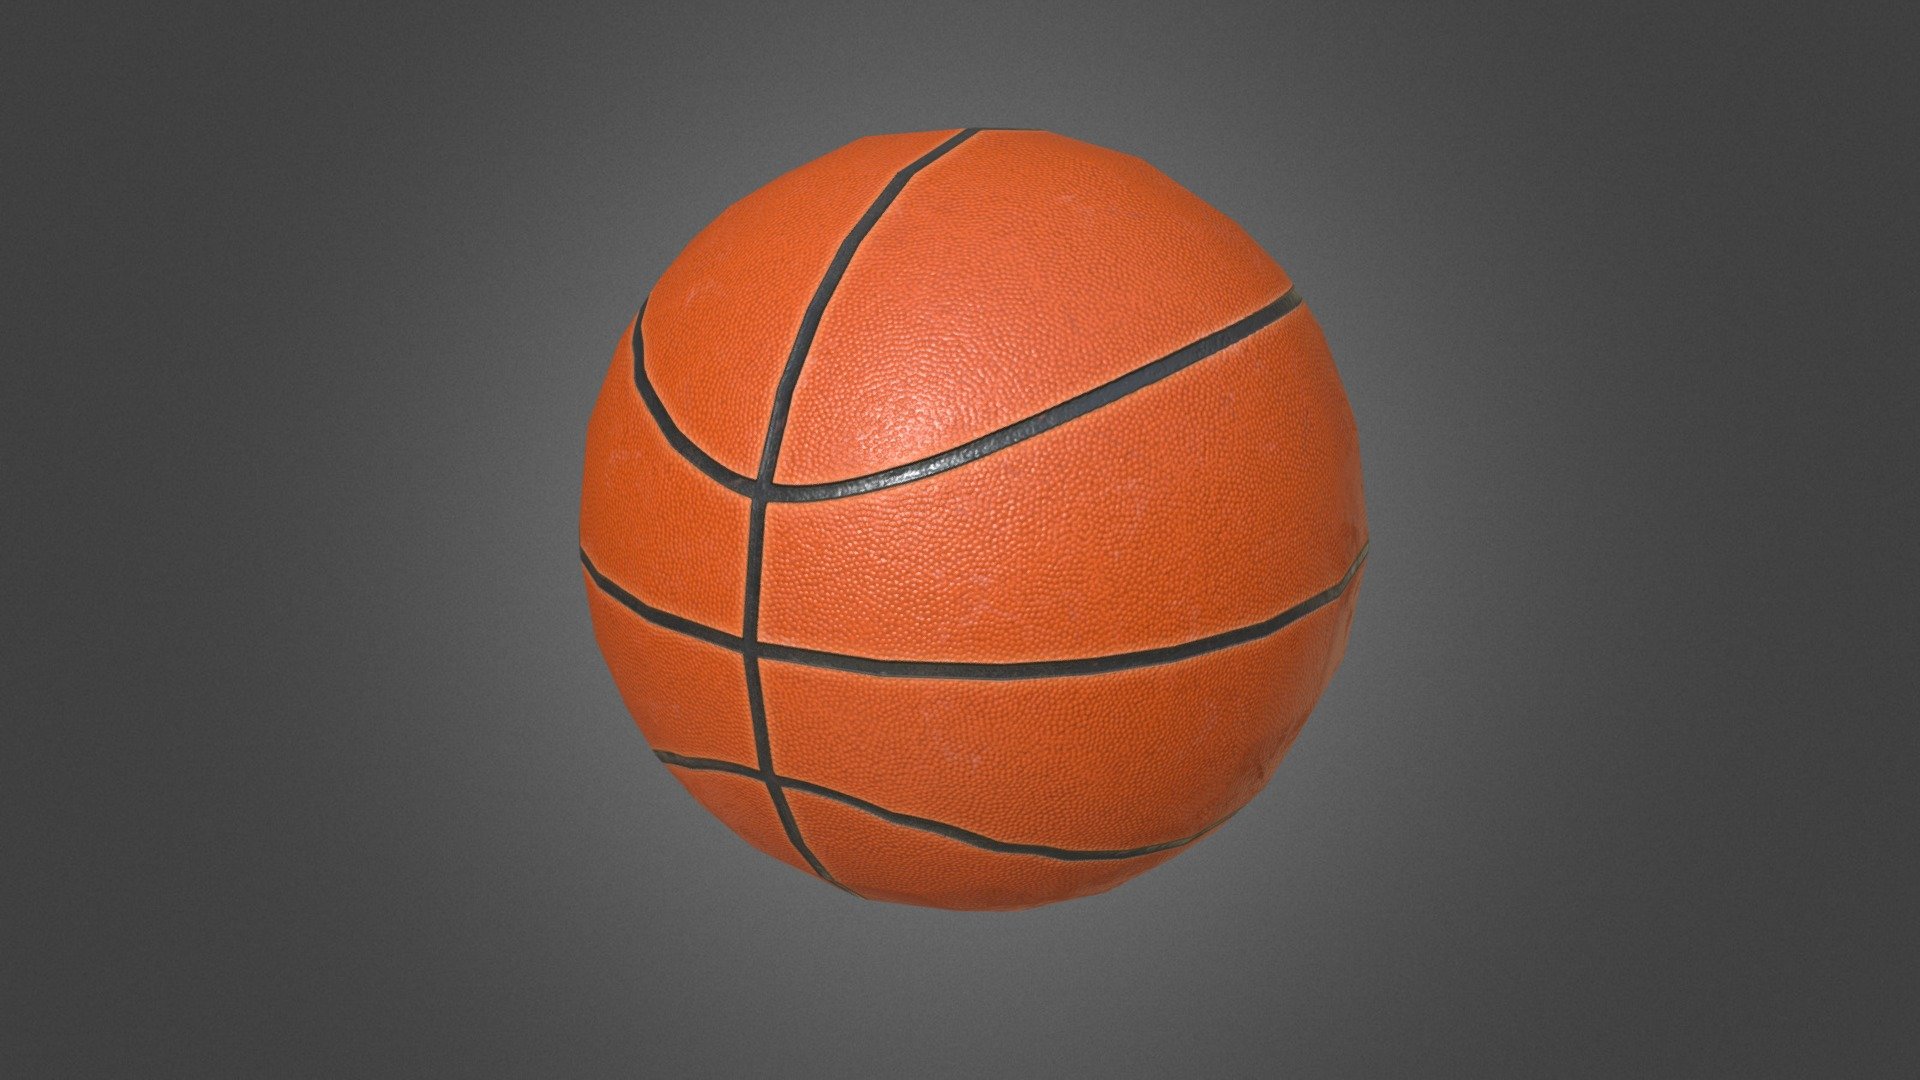 Low poly, PBR, game ready 3D model of New Basketball Ball 
FBX format
Texture Size: 2048x2048 - New Basketball Ball Low Poly PBR Model - Buy Royalty Free 3D model by AleksandrKorostyliov 3d model